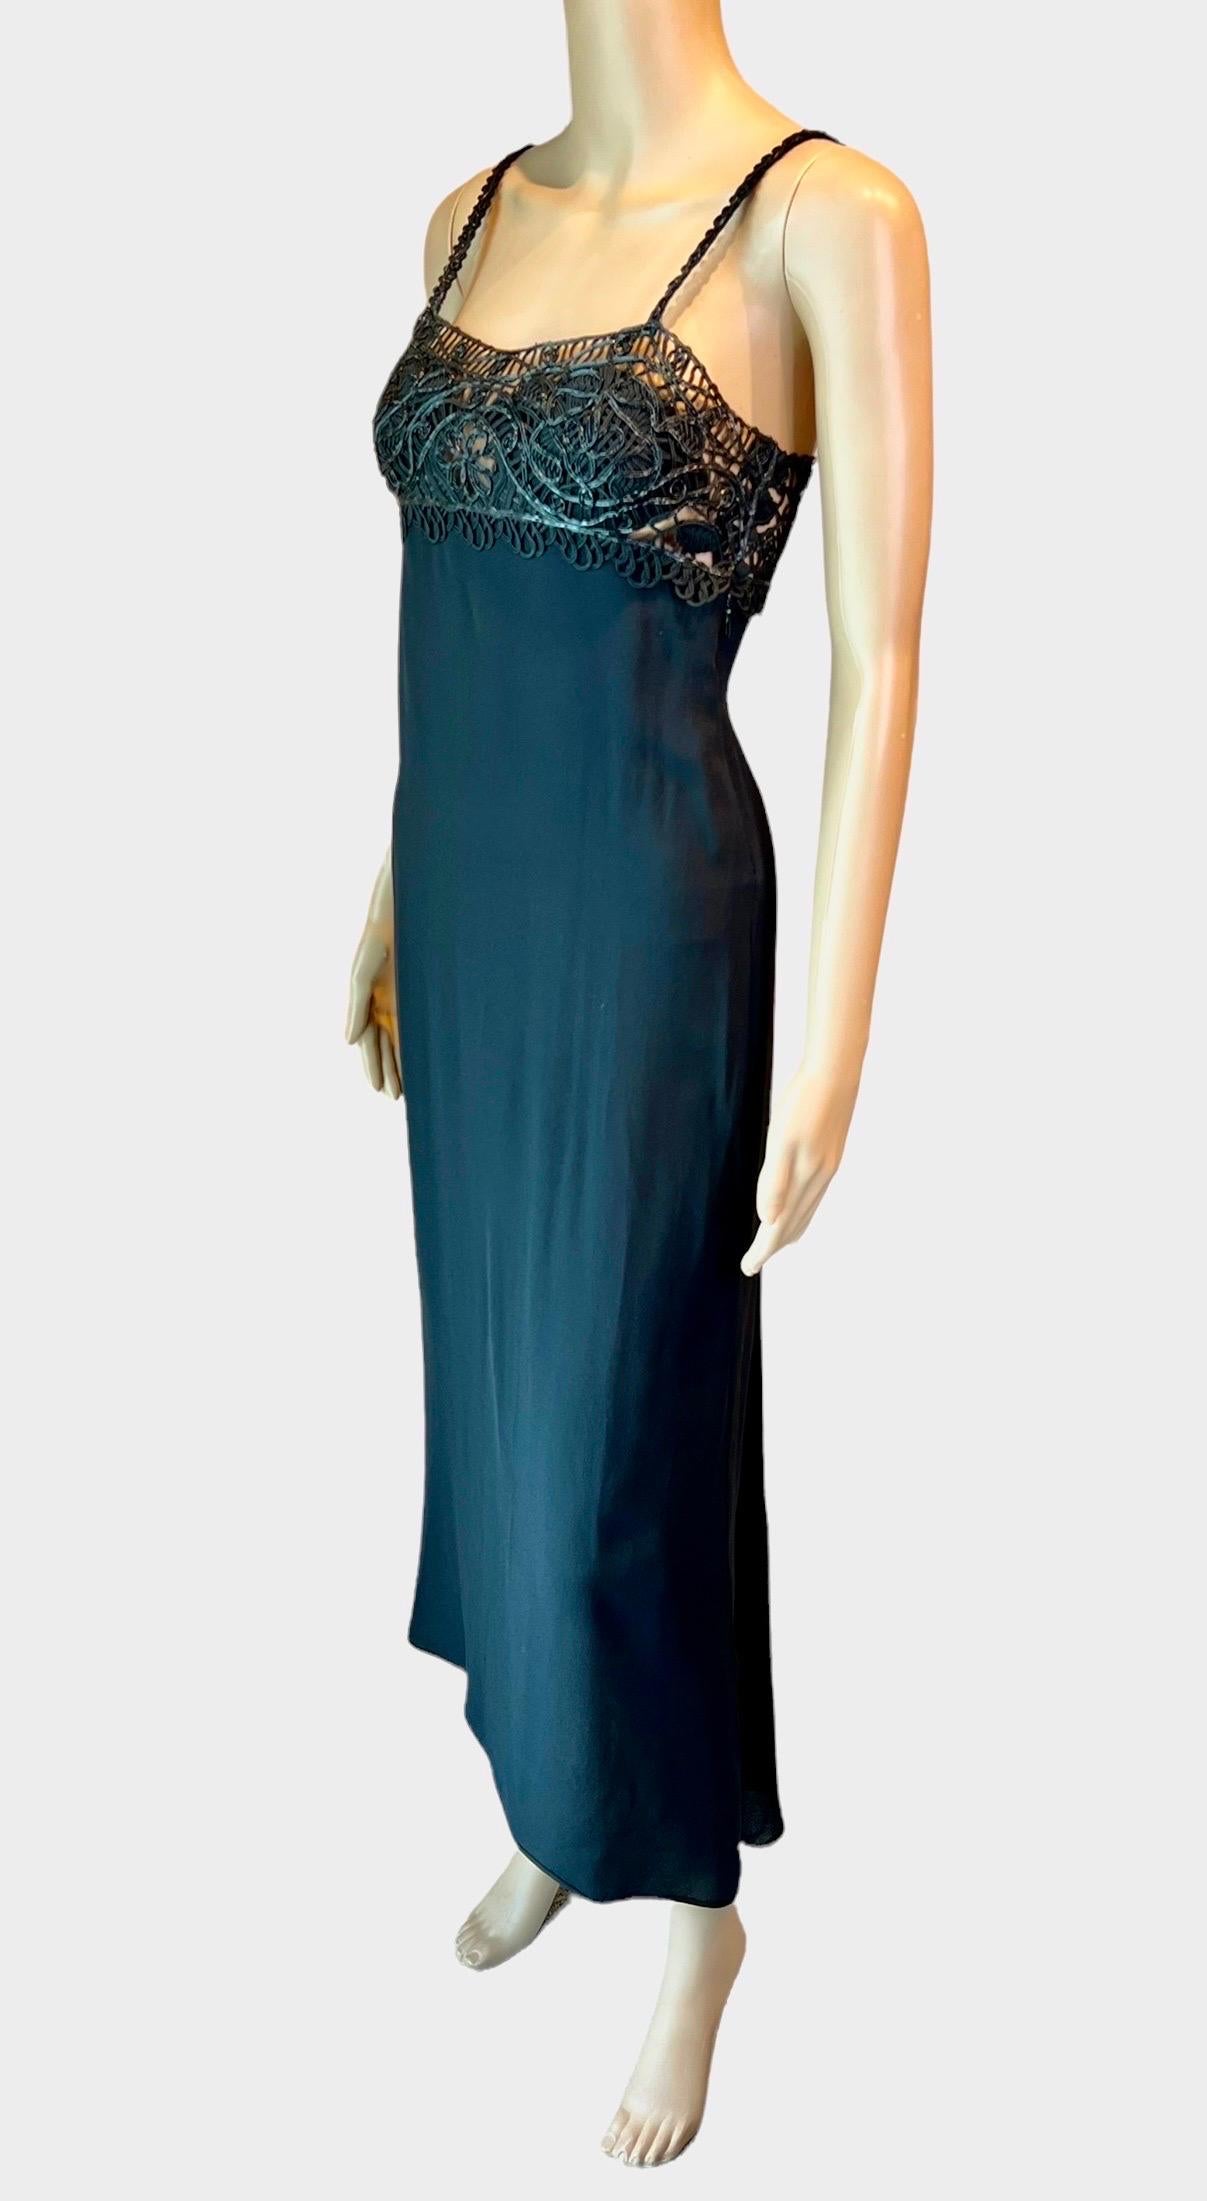 Gianni Versace S/S 1997 Runway Embroidered Lace Black Evening Dress Gown  In Good Condition For Sale In Naples, FL